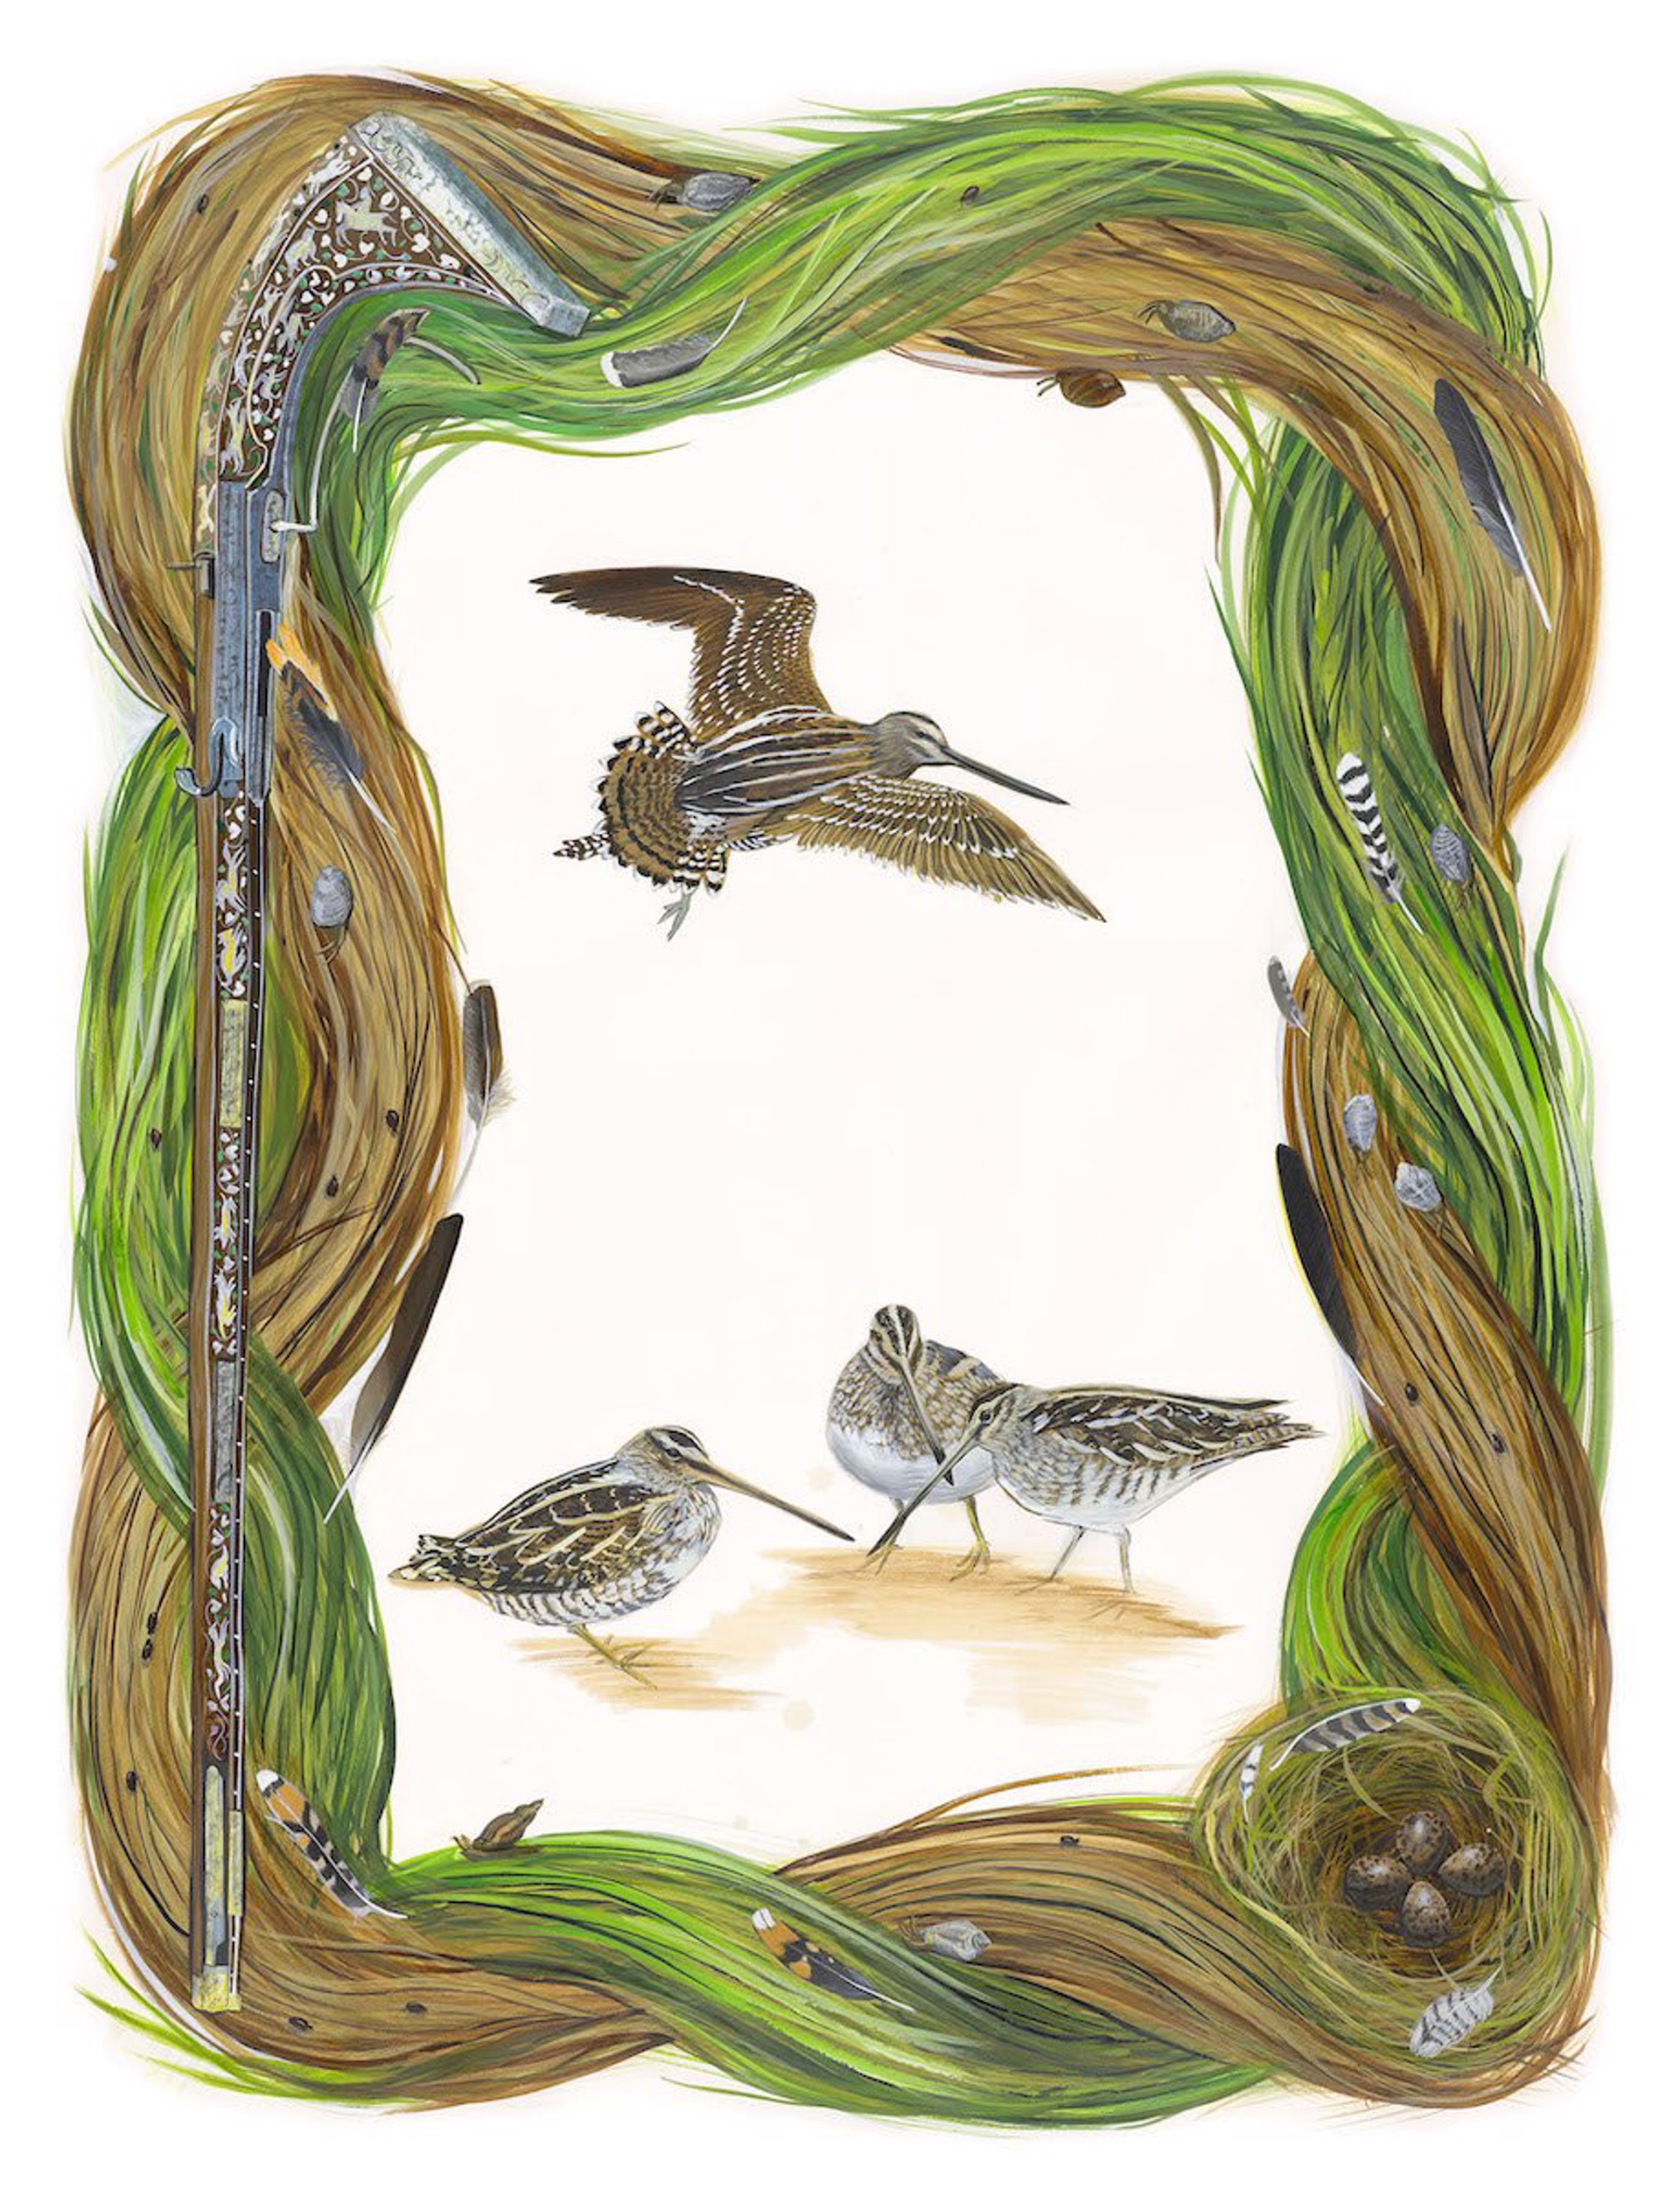 Birds of Shakespeare: Common Snipe (Gallinago gallinago) by Missy Dunaway